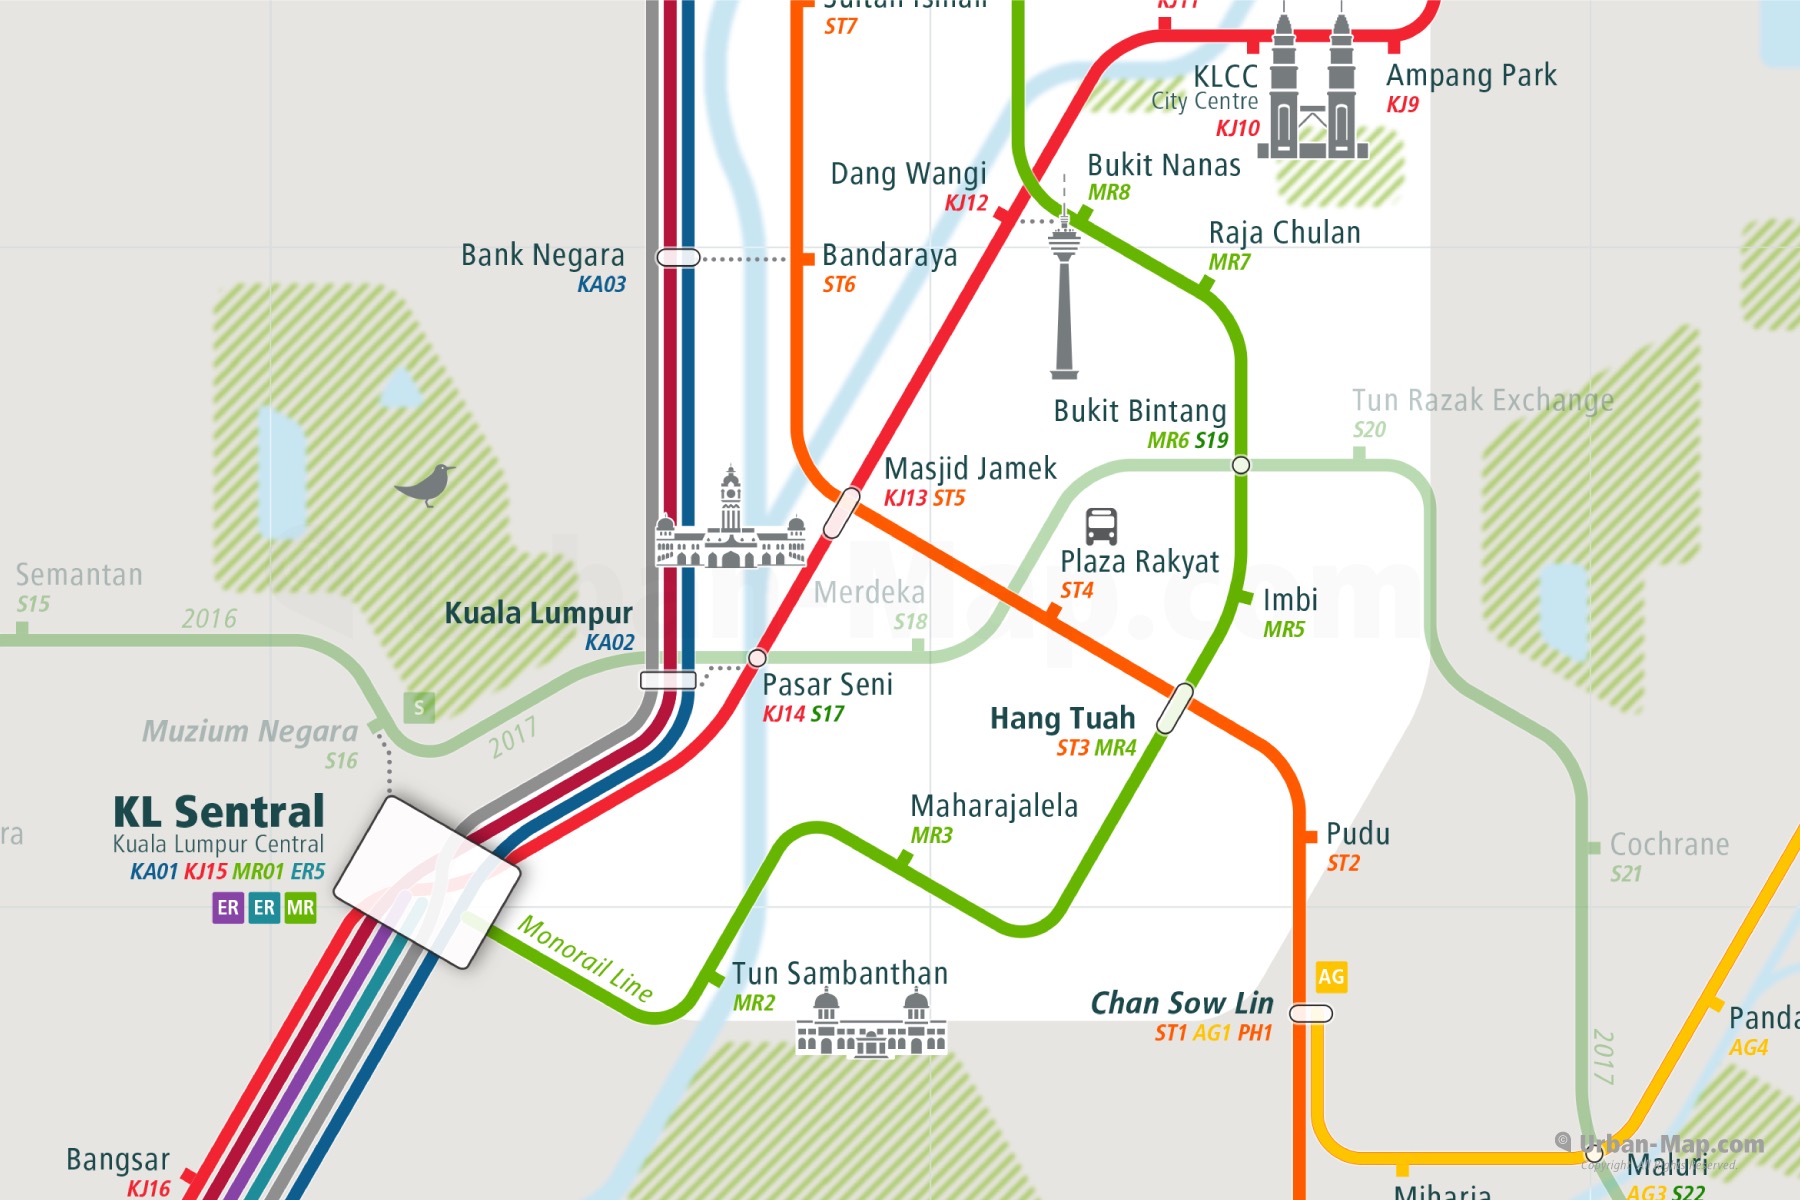 Kuala Lumpur City Rail Map shows the train and public transportation routes of metro - Close-Up